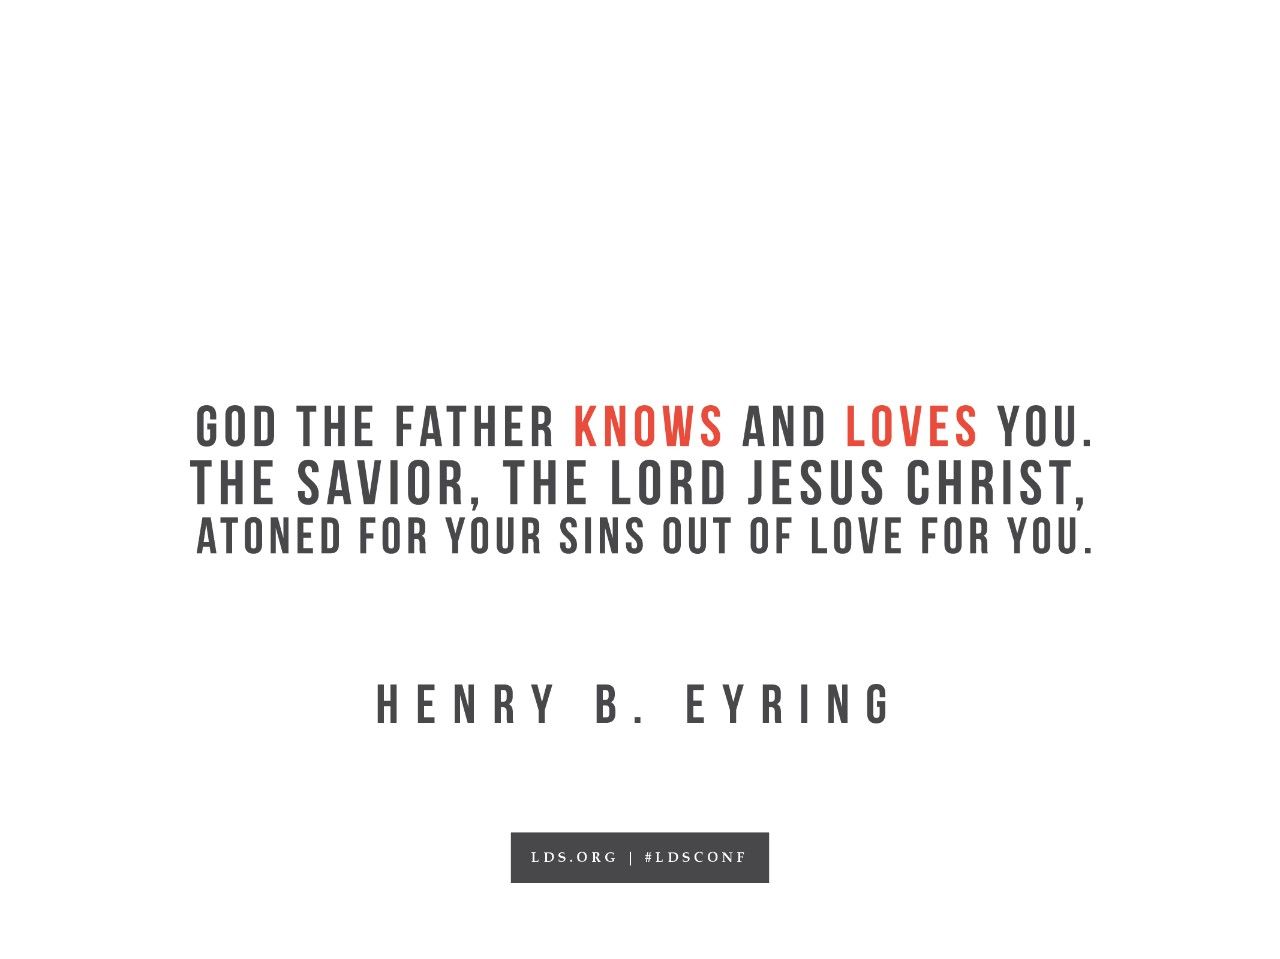 “God the Father knows and loves you. The Savior, the Lord Jesus Christ, atoned for your sins out of love for you.”—Henry B. Eyring, “Gratitude on the Sabbath Day”